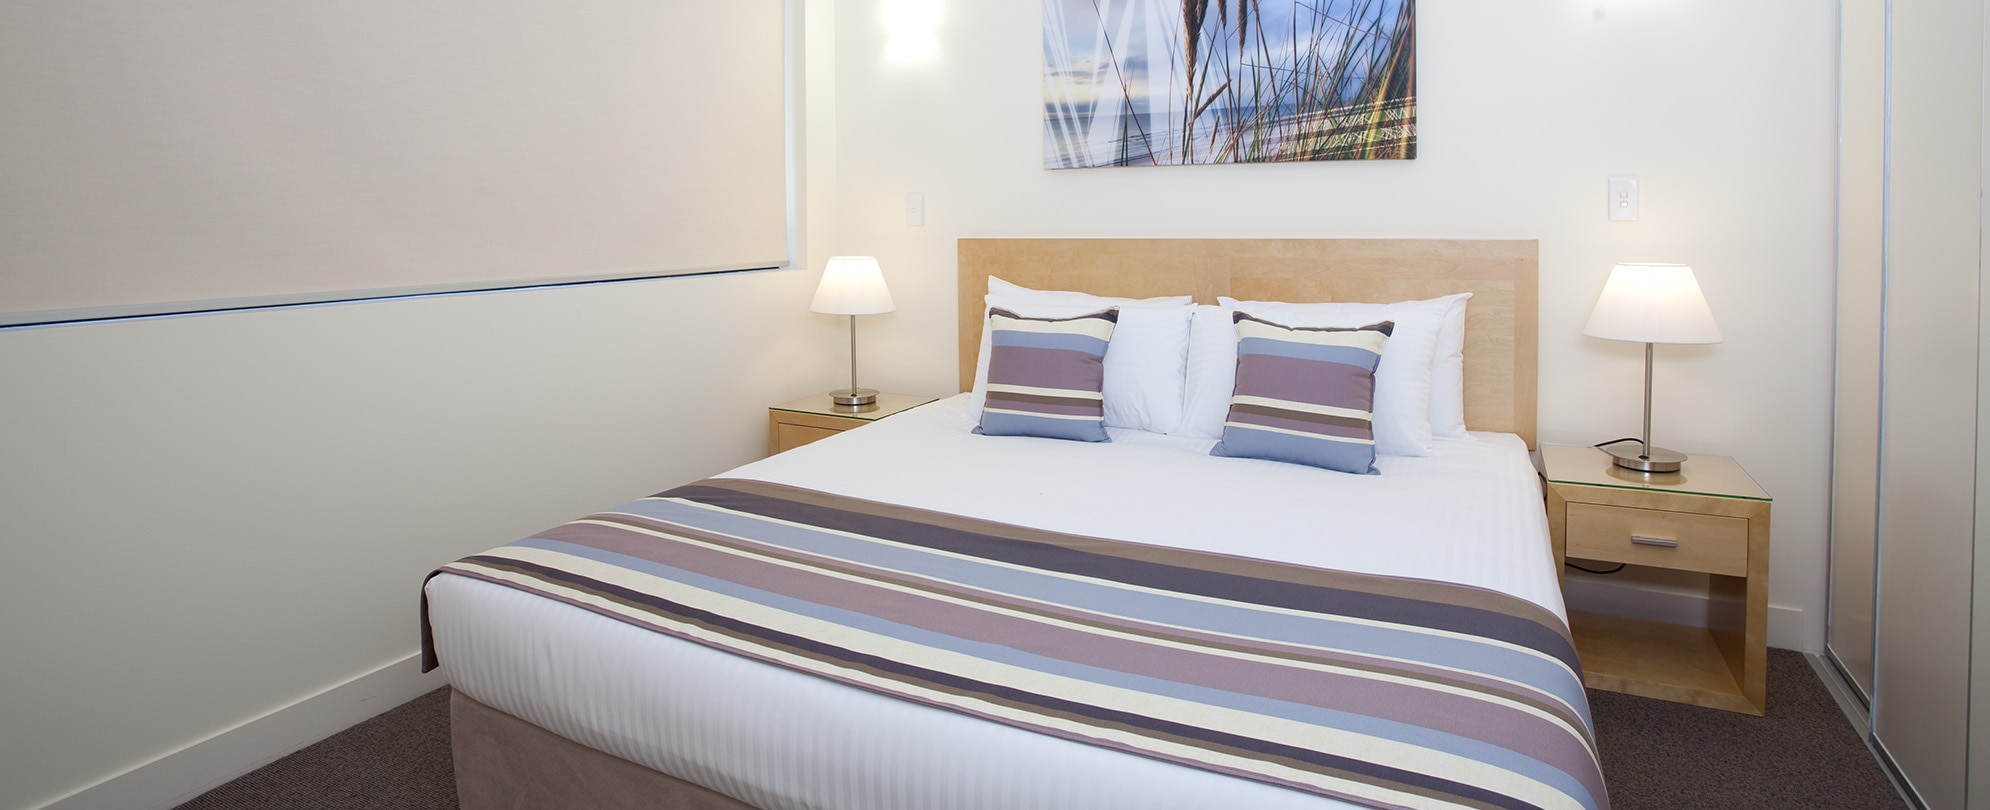 A queen-sized bed in one of the rooms in a 2-bedroom deluxe suite at Club Wyndham Coffs Harbor.